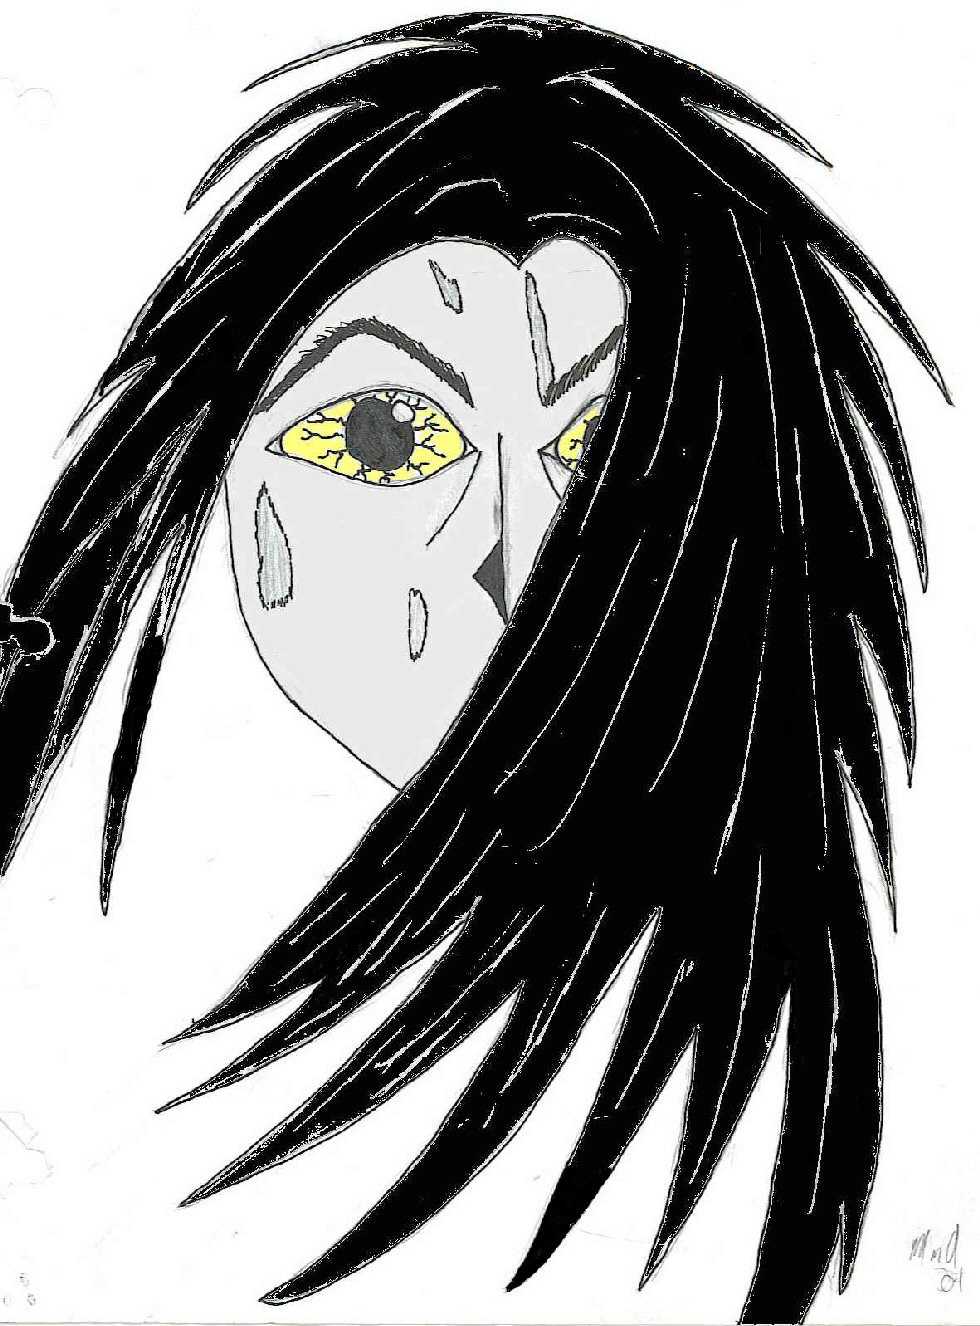 The Grudge by demongoth1